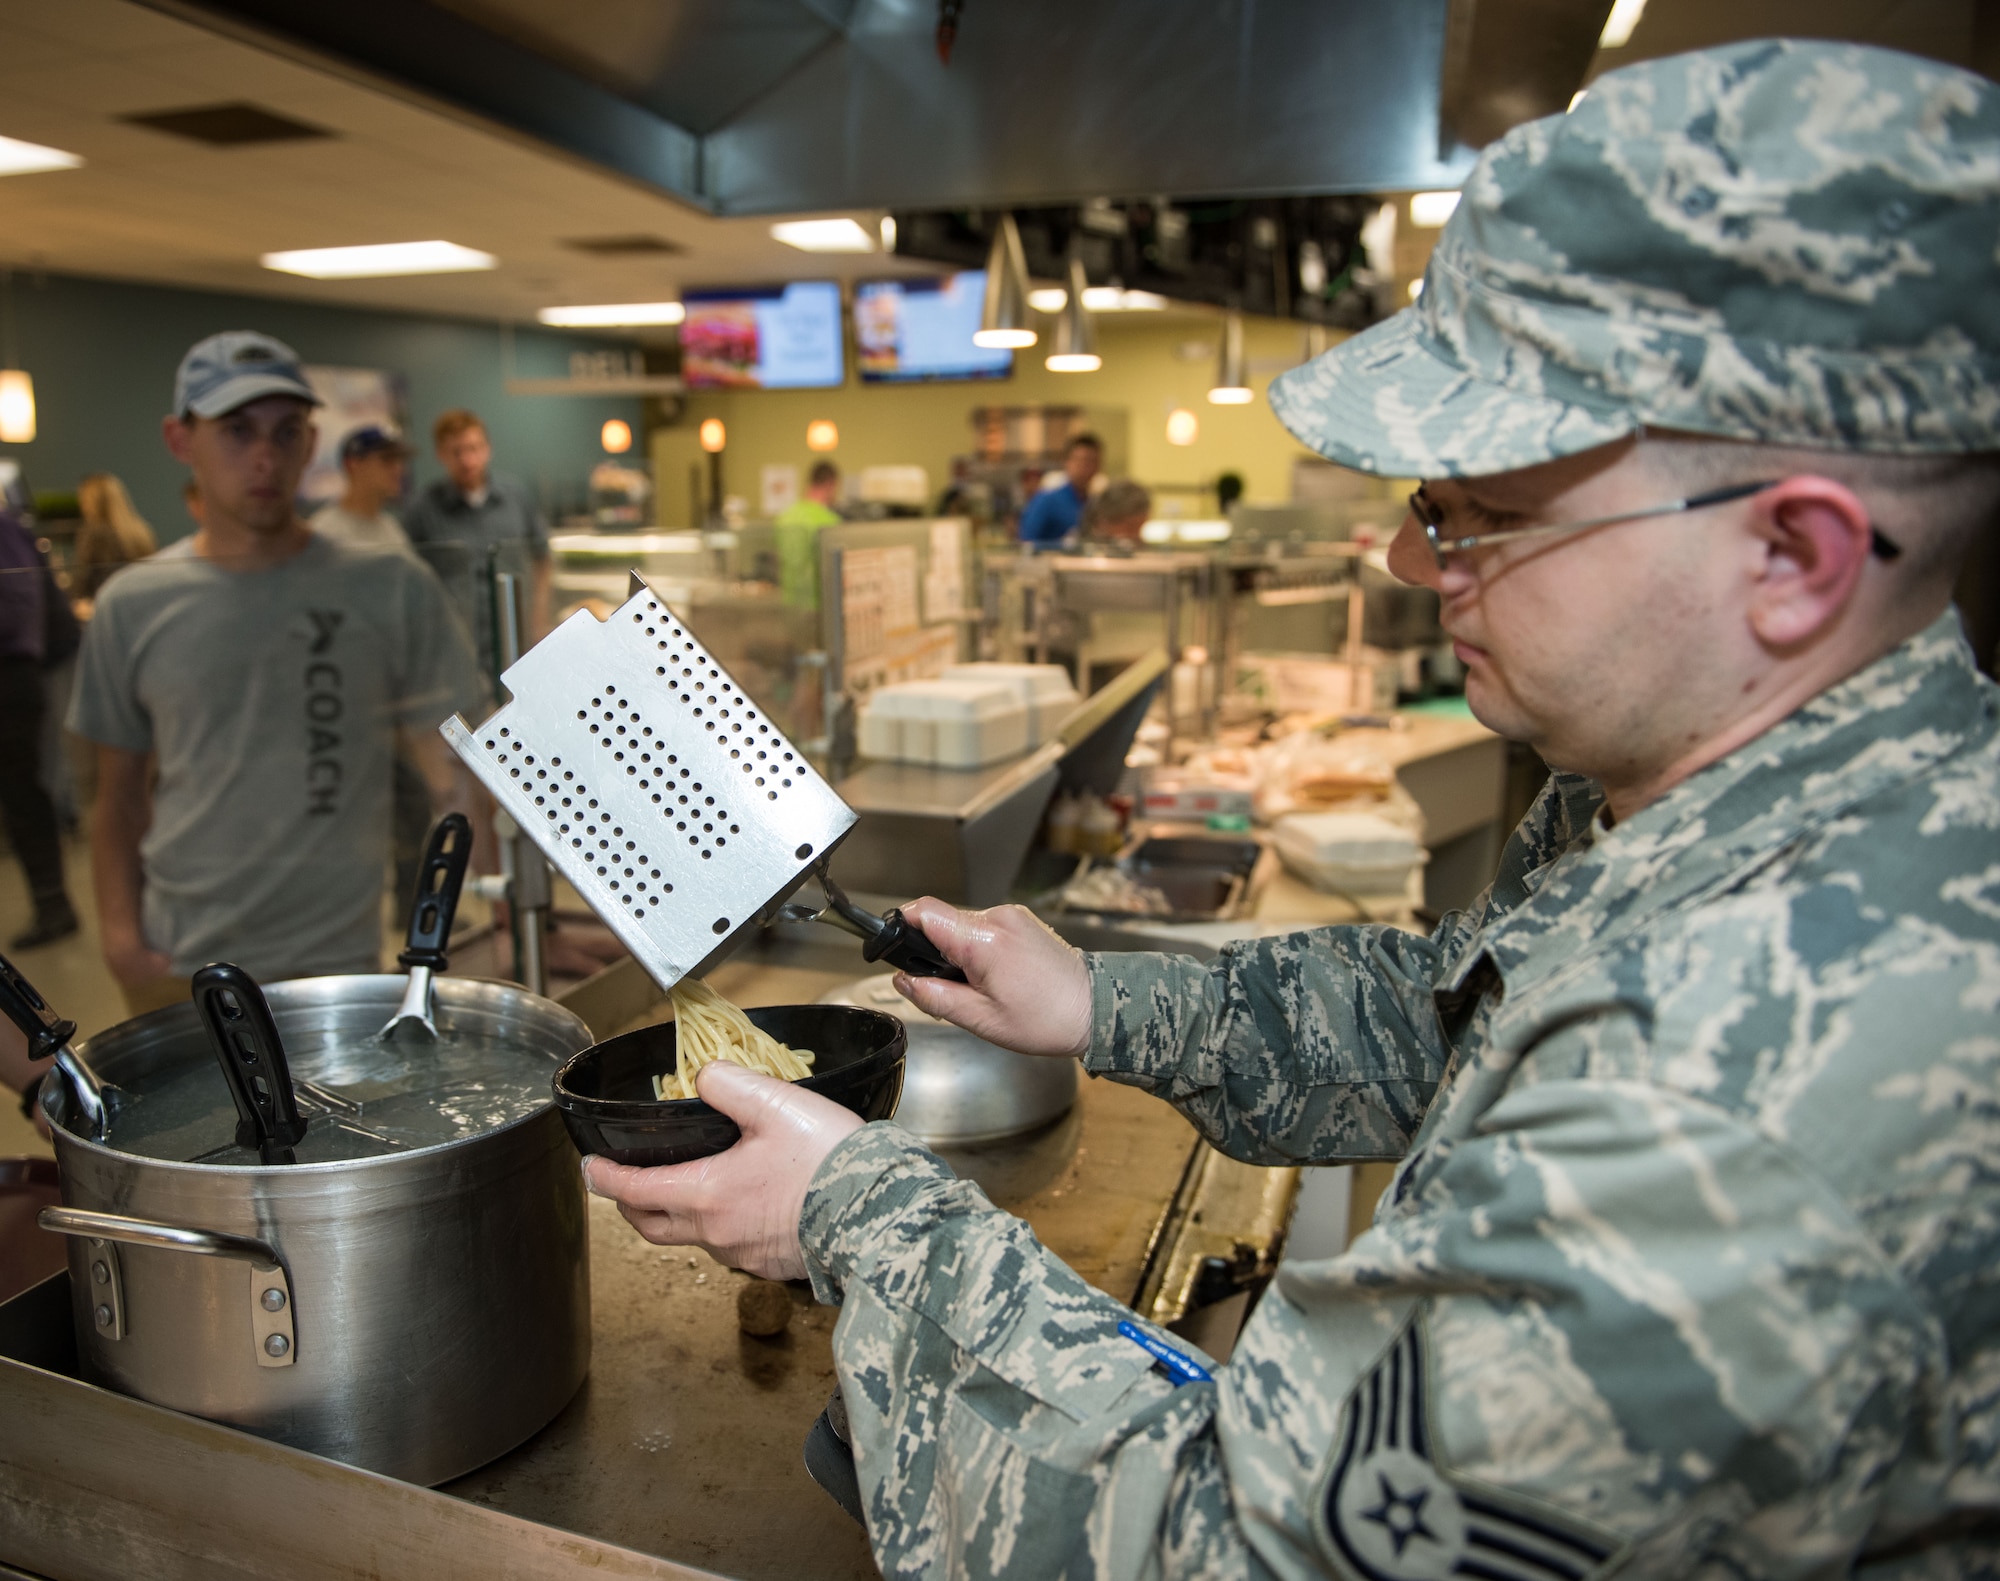 Staff Sgt. Nicholas Patton, 446th Force Support Squadron services craftsman, serves pasta during lunch at the Contrails Dining Facility on Beale Air Force Base, April 23. In addition to his food service training Patton is trained in lodging, fitness, recreation and mortuary affairs. (U.S. Air Force photo by Staff Sgt. Brenda Davis)